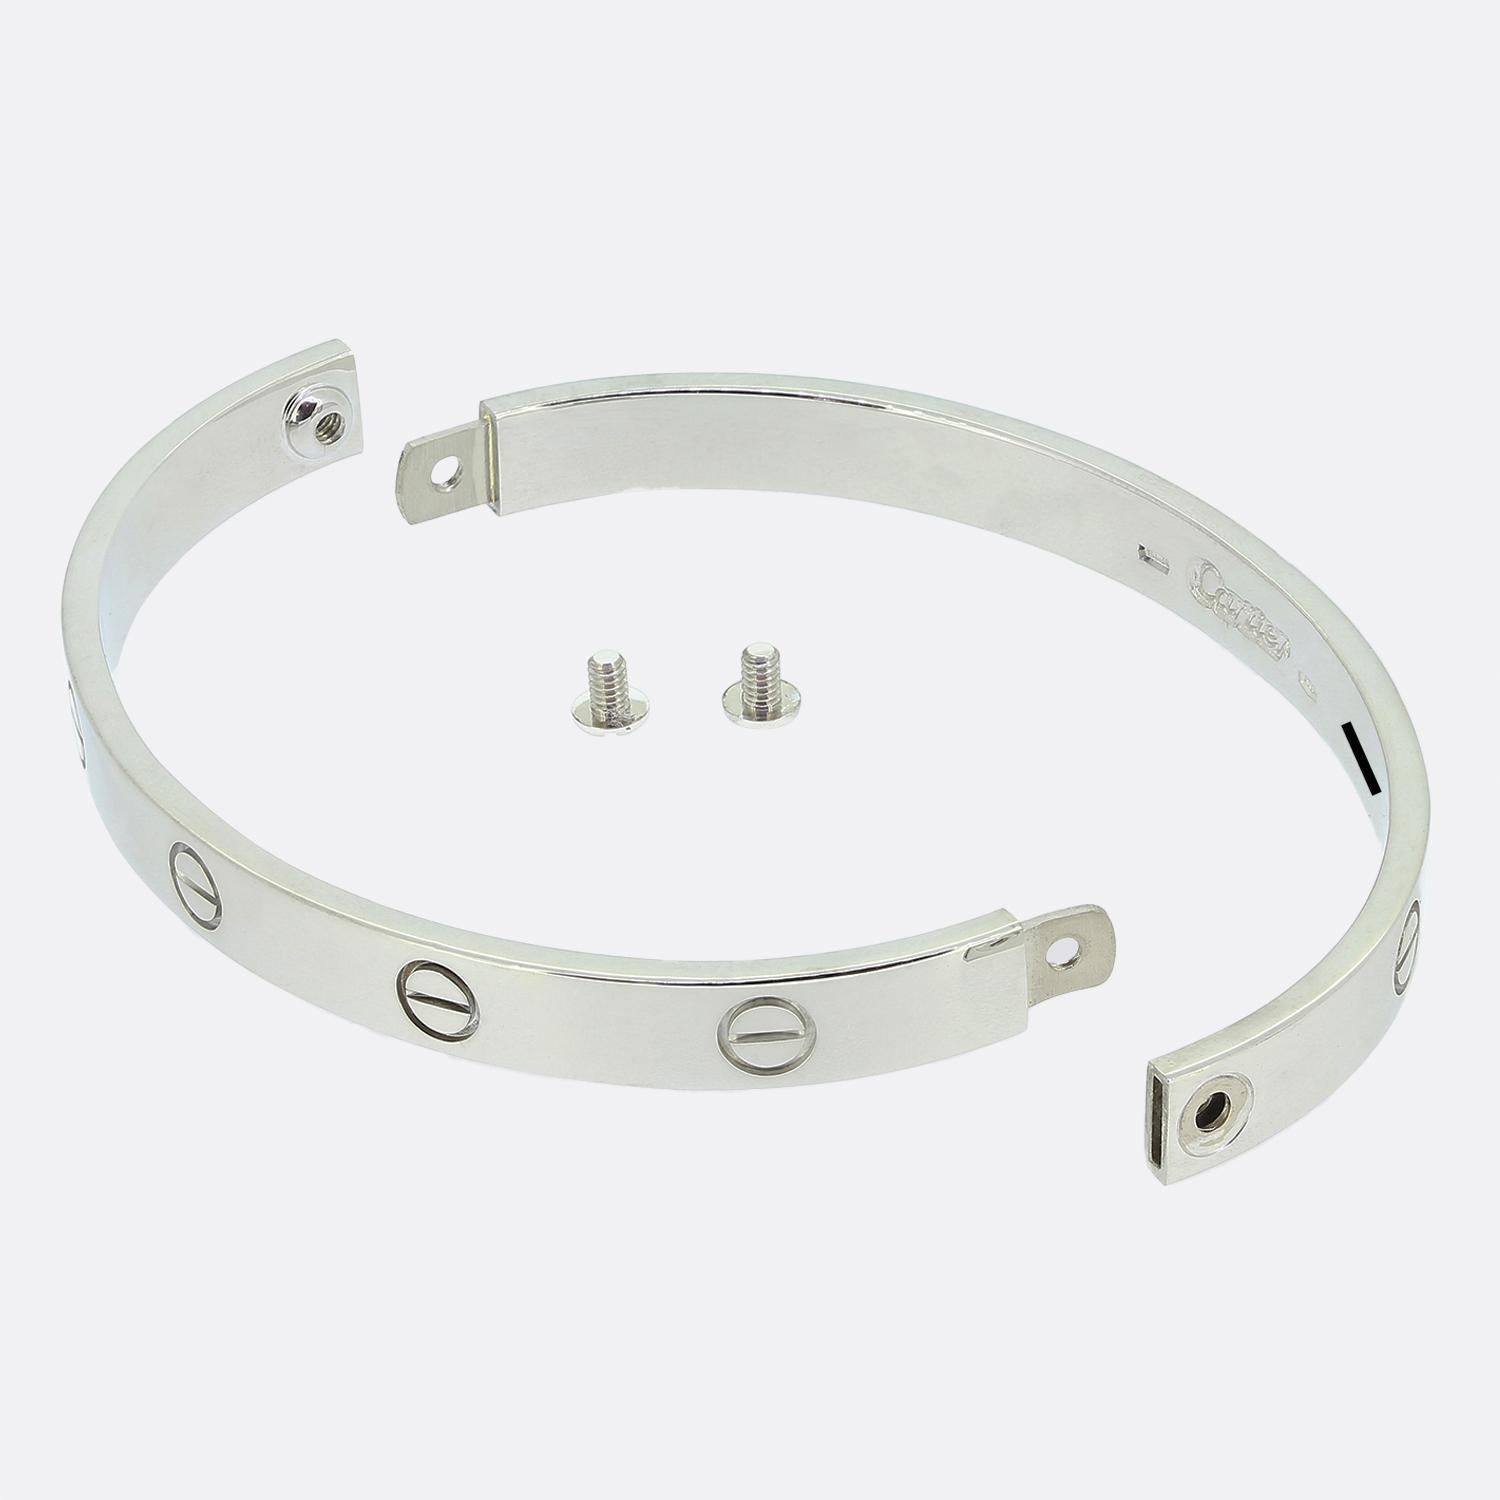 Here we have an 18ct white gold bangle from the world renowned luxury jewellery house of Cartier. This bangle forms part of the LOVE collection and is one of the most celebrated items of jewellery in the world. This particular model features the